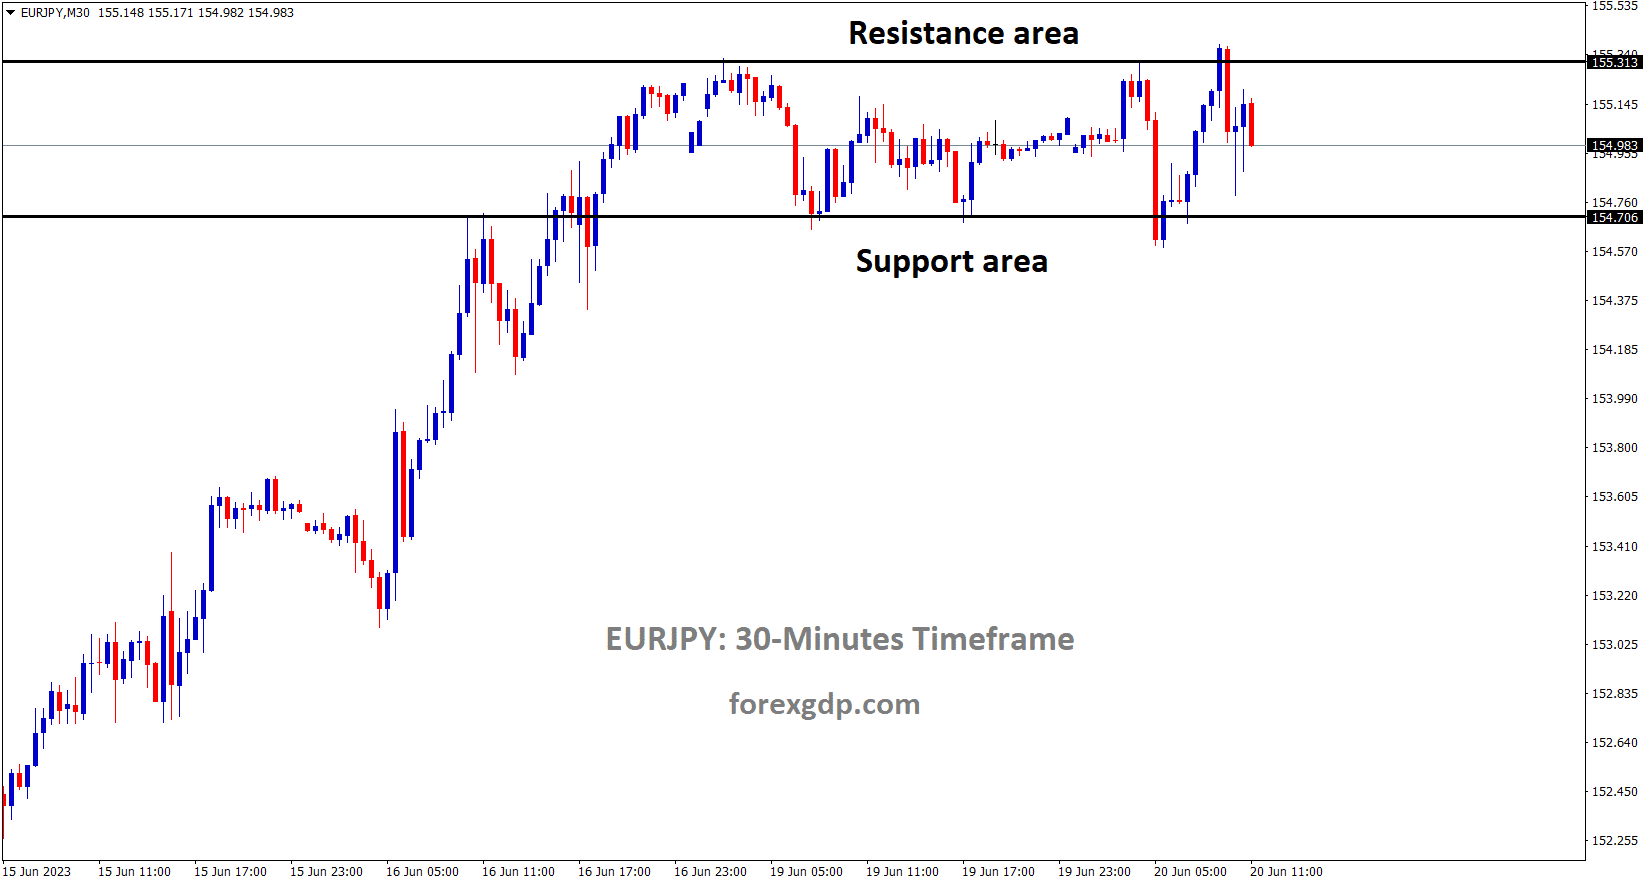 EURJPY is moving in the Box pattern and the market has fallen from the resistance area of the pattern